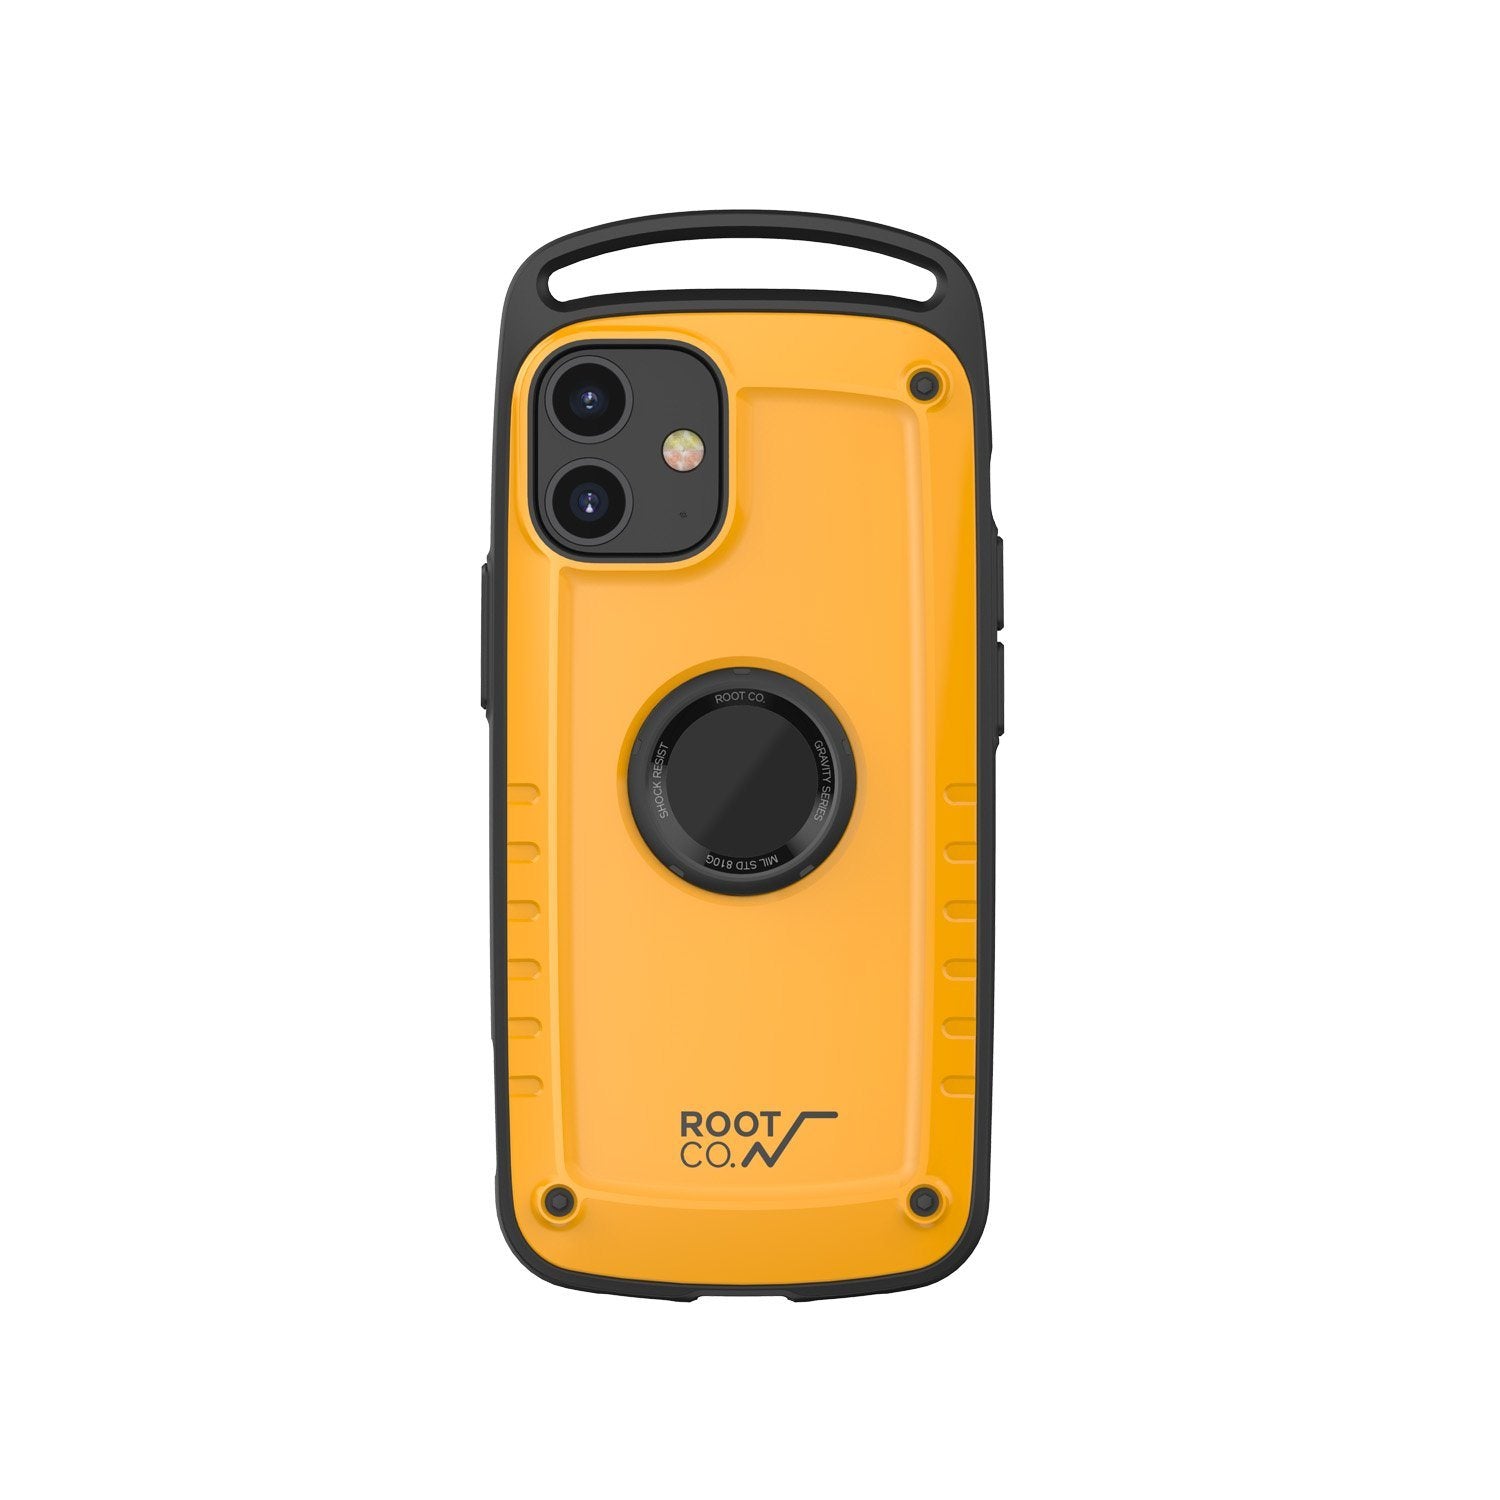 ROOT CO. Gravity Shock Resist Case Pro for iPhone 12 mini 5.4"(2020), Gloss Yellow Default ROOT CO. 